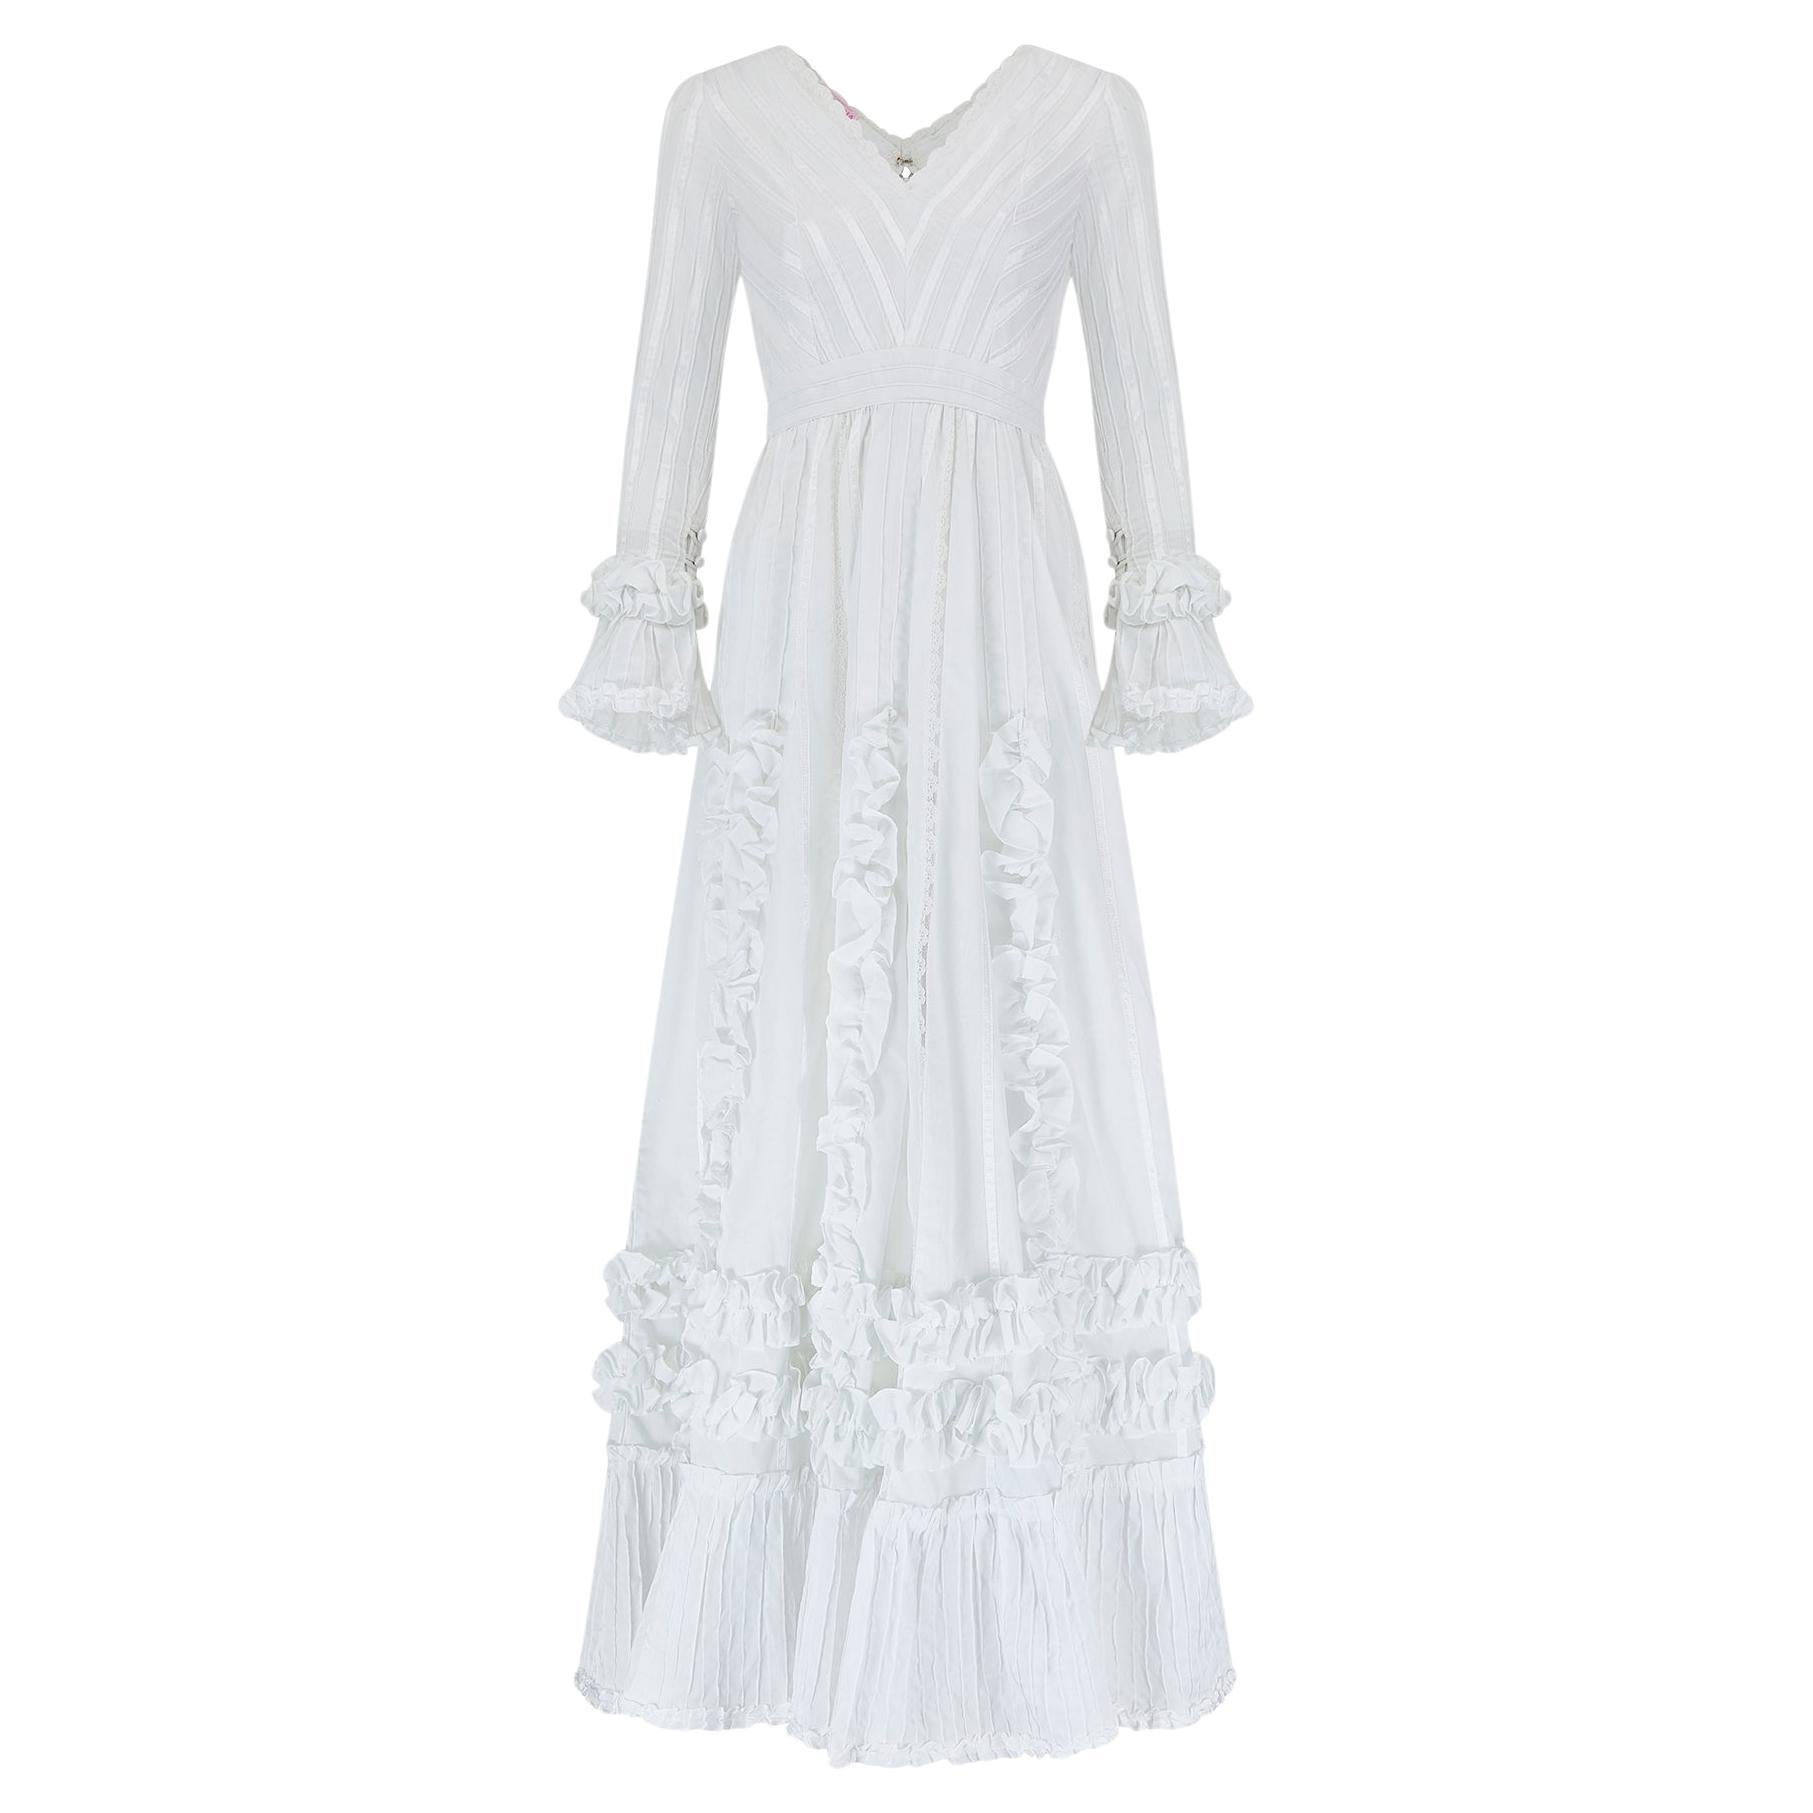 1970s Mexicana White Cotton and Lace Wedding Dress For Sale